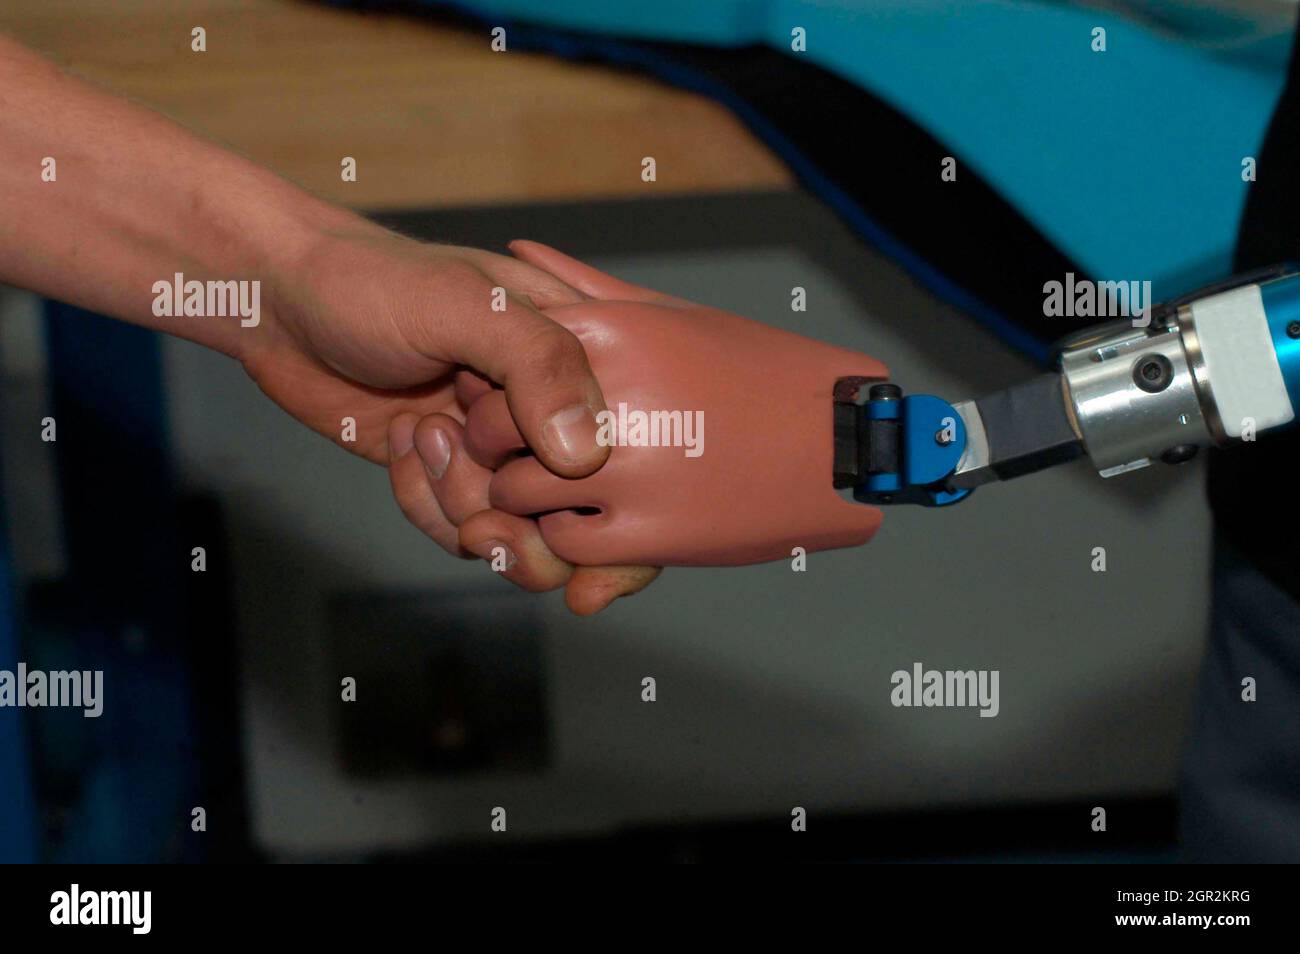 Cropped Image Of Man Doing Handshake With Robotic Arm Stock Photo